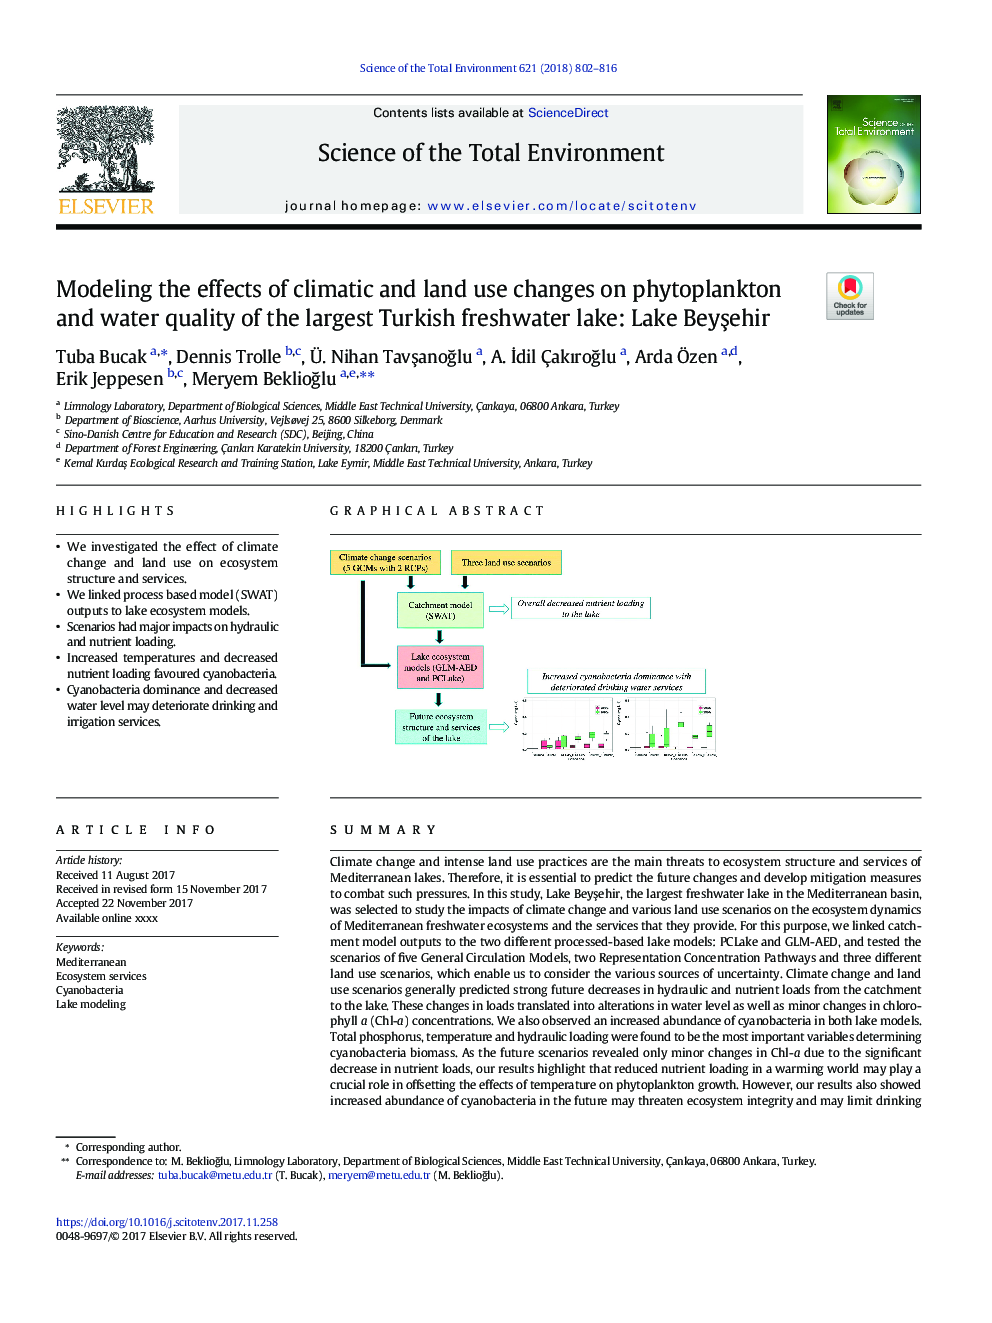 Modeling the effects of climatic and land use changes on phytoplankton and water quality of the largest Turkish freshwater lake: Lake BeyÅehir